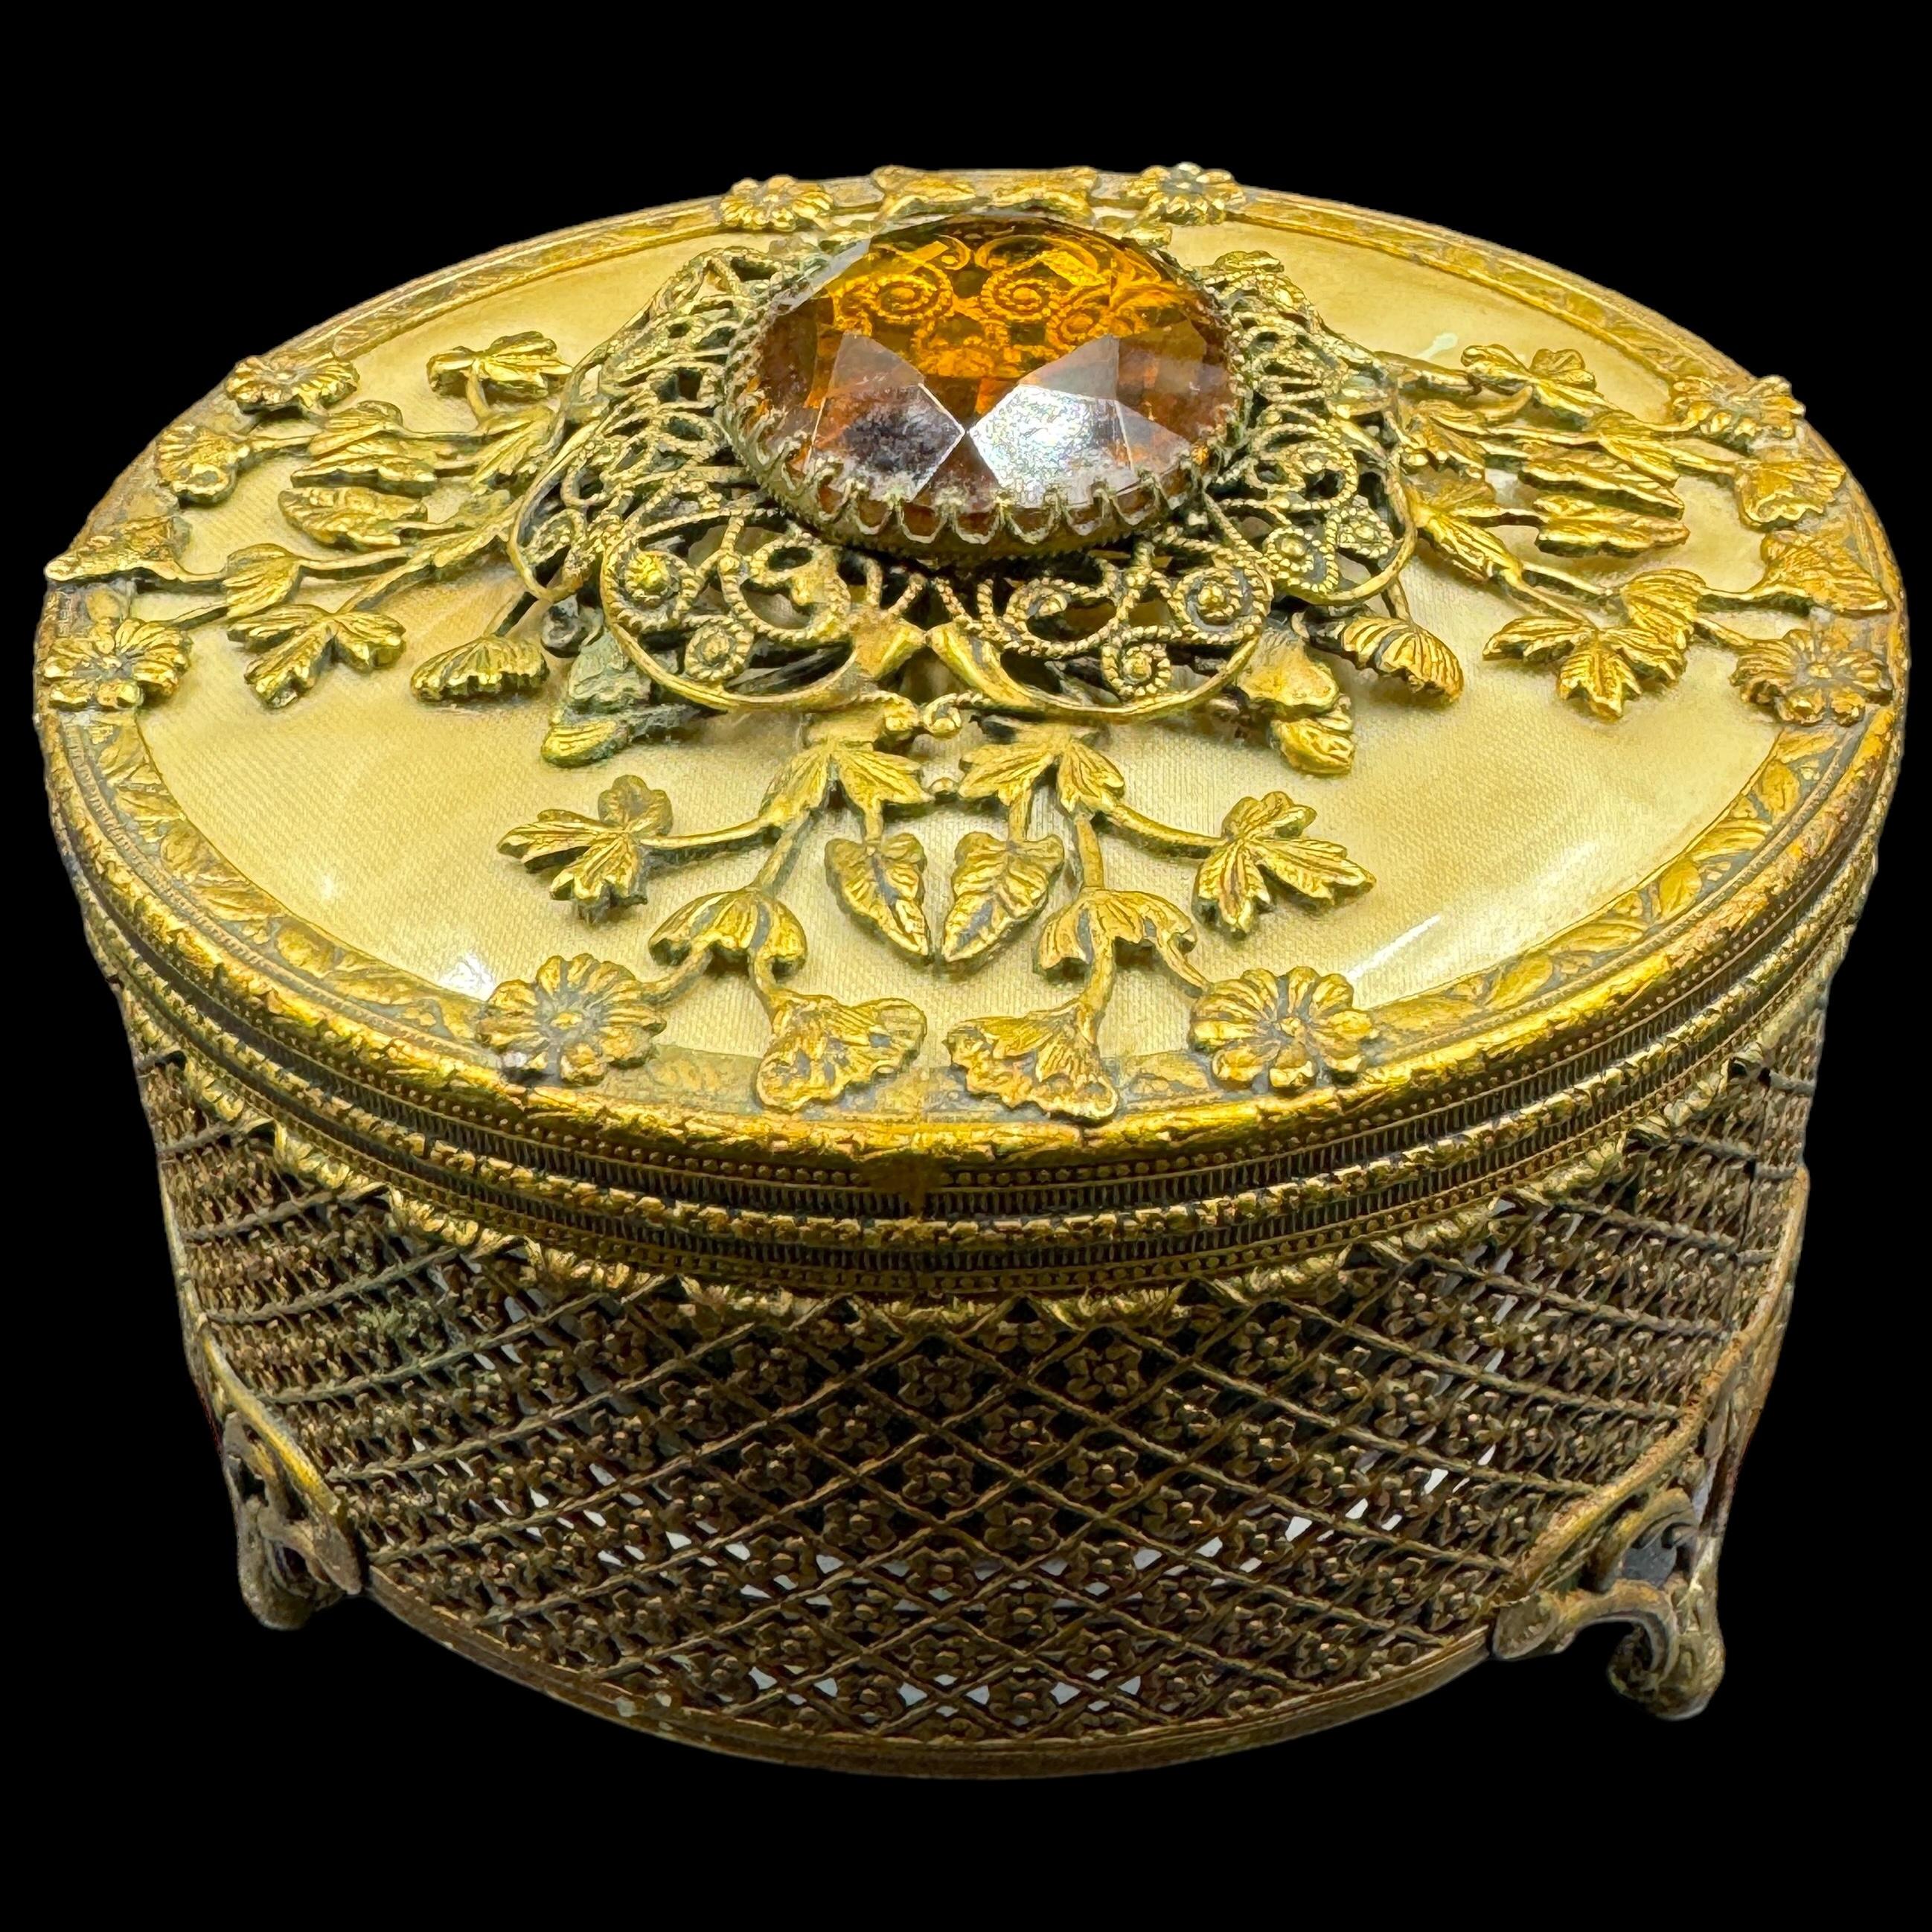 Gorgeous antique gold-plated jewelry box